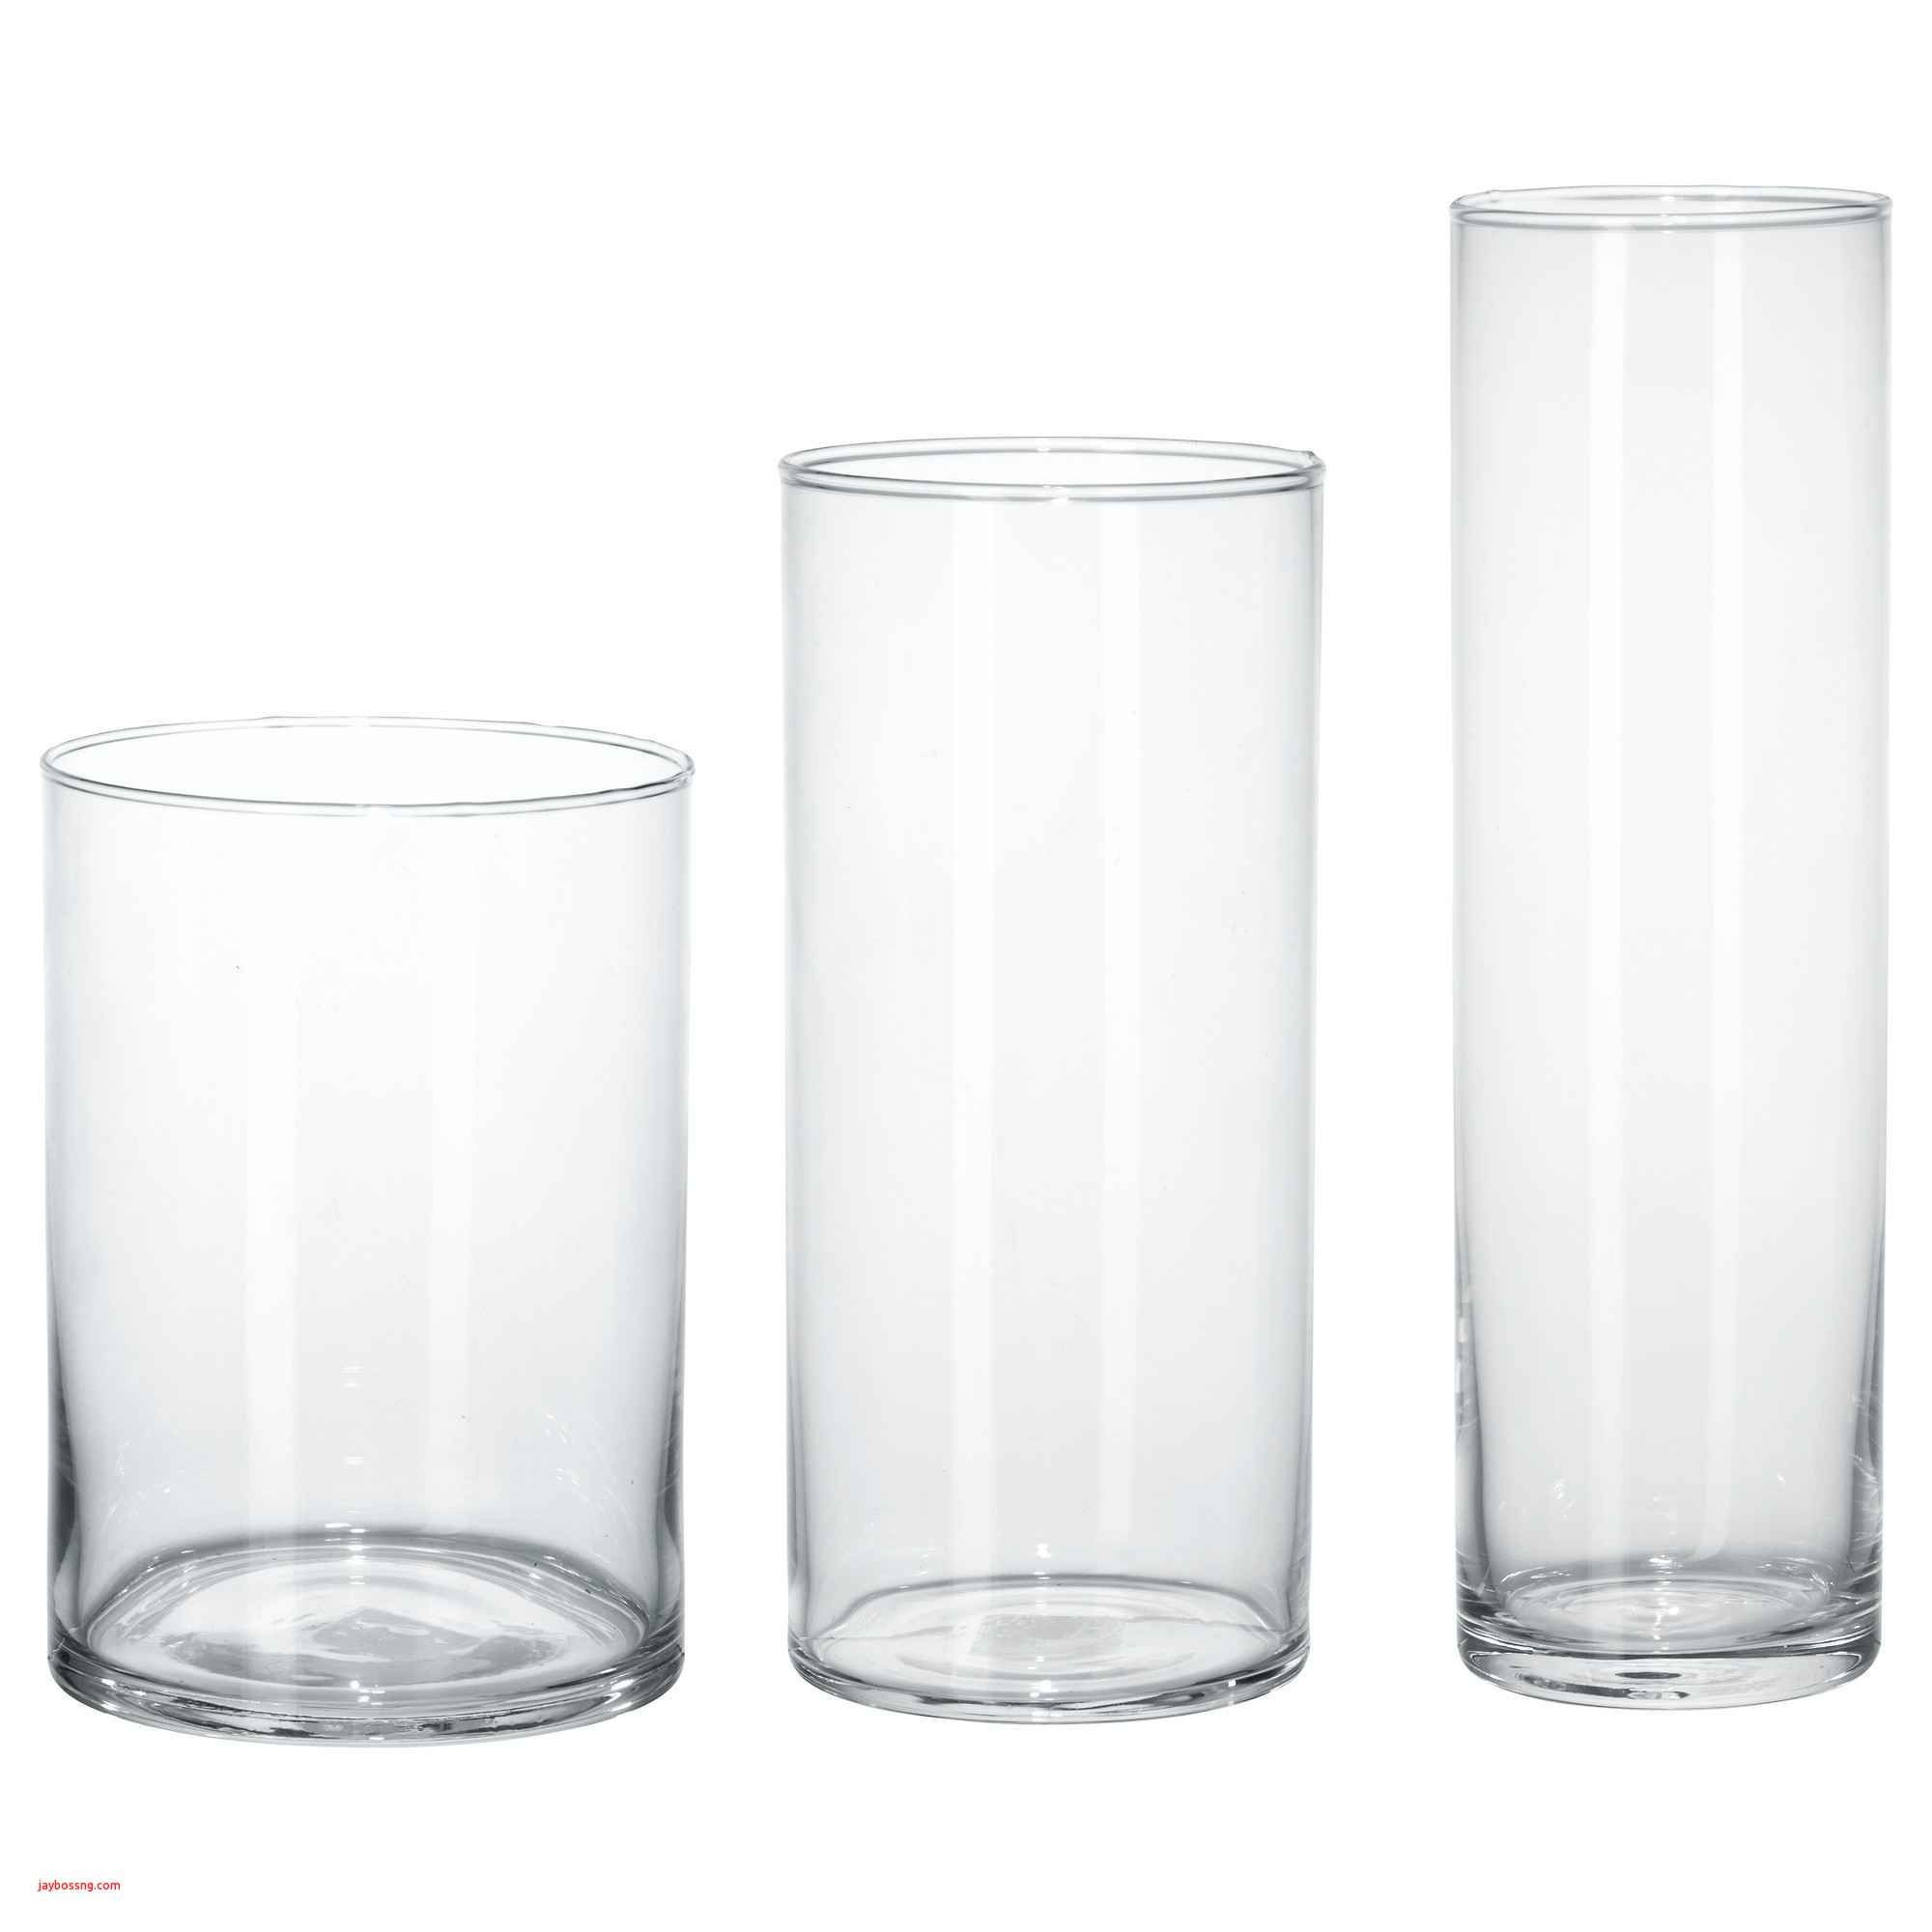 25 Perfect Glass Jars and Vases 2024 free download glass jars and vases of brown glass vase fresh ikea white table created pe s5h vases ikea throughout brown glass vase fresh ikea white table created pe s5h vases ikea vase i 0d bladet